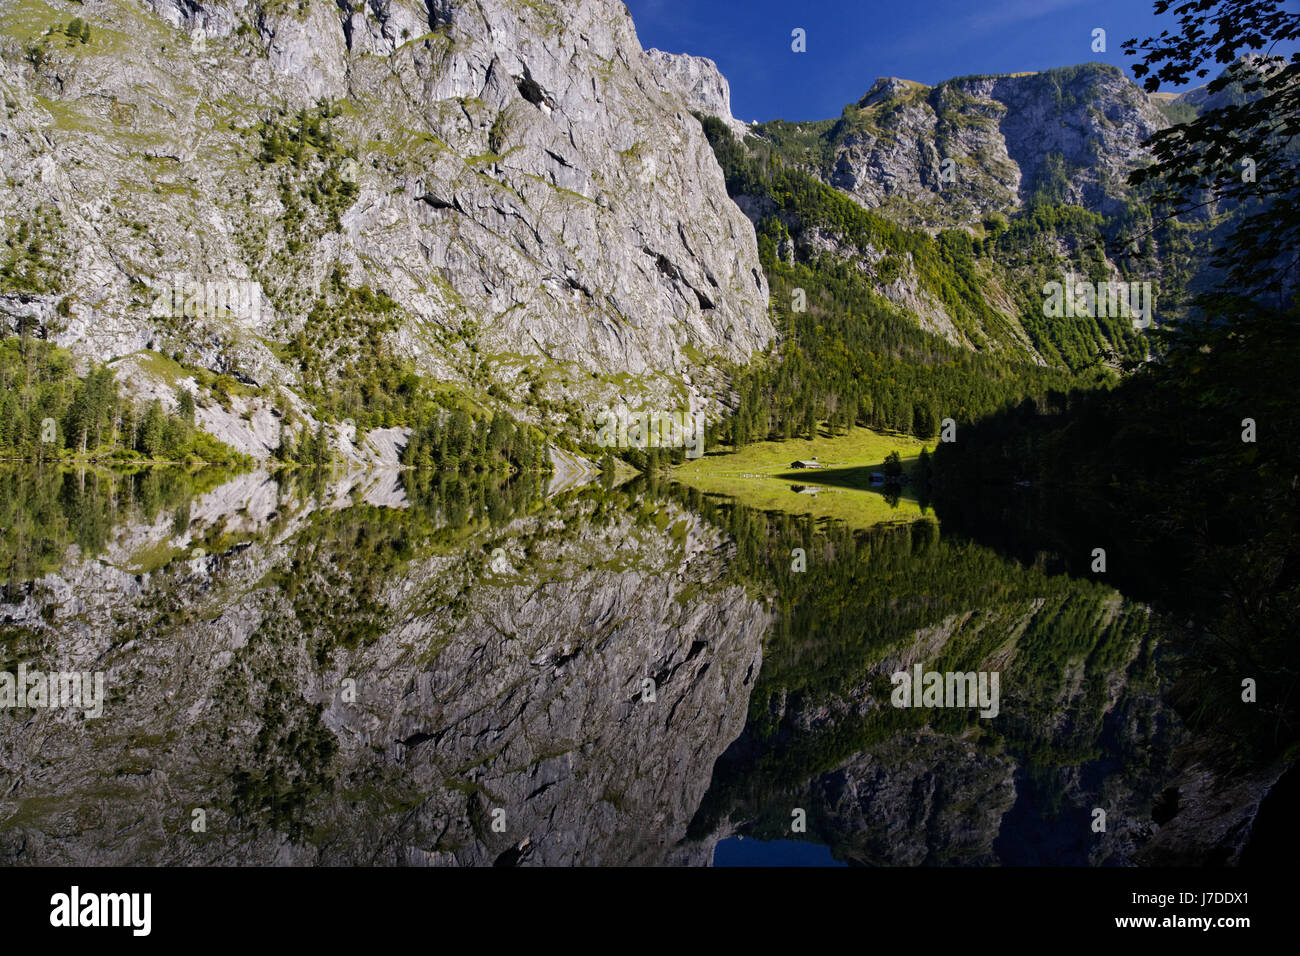 reflection on the crystal clear water in the heart of the obersee nationalpar Stock Photo